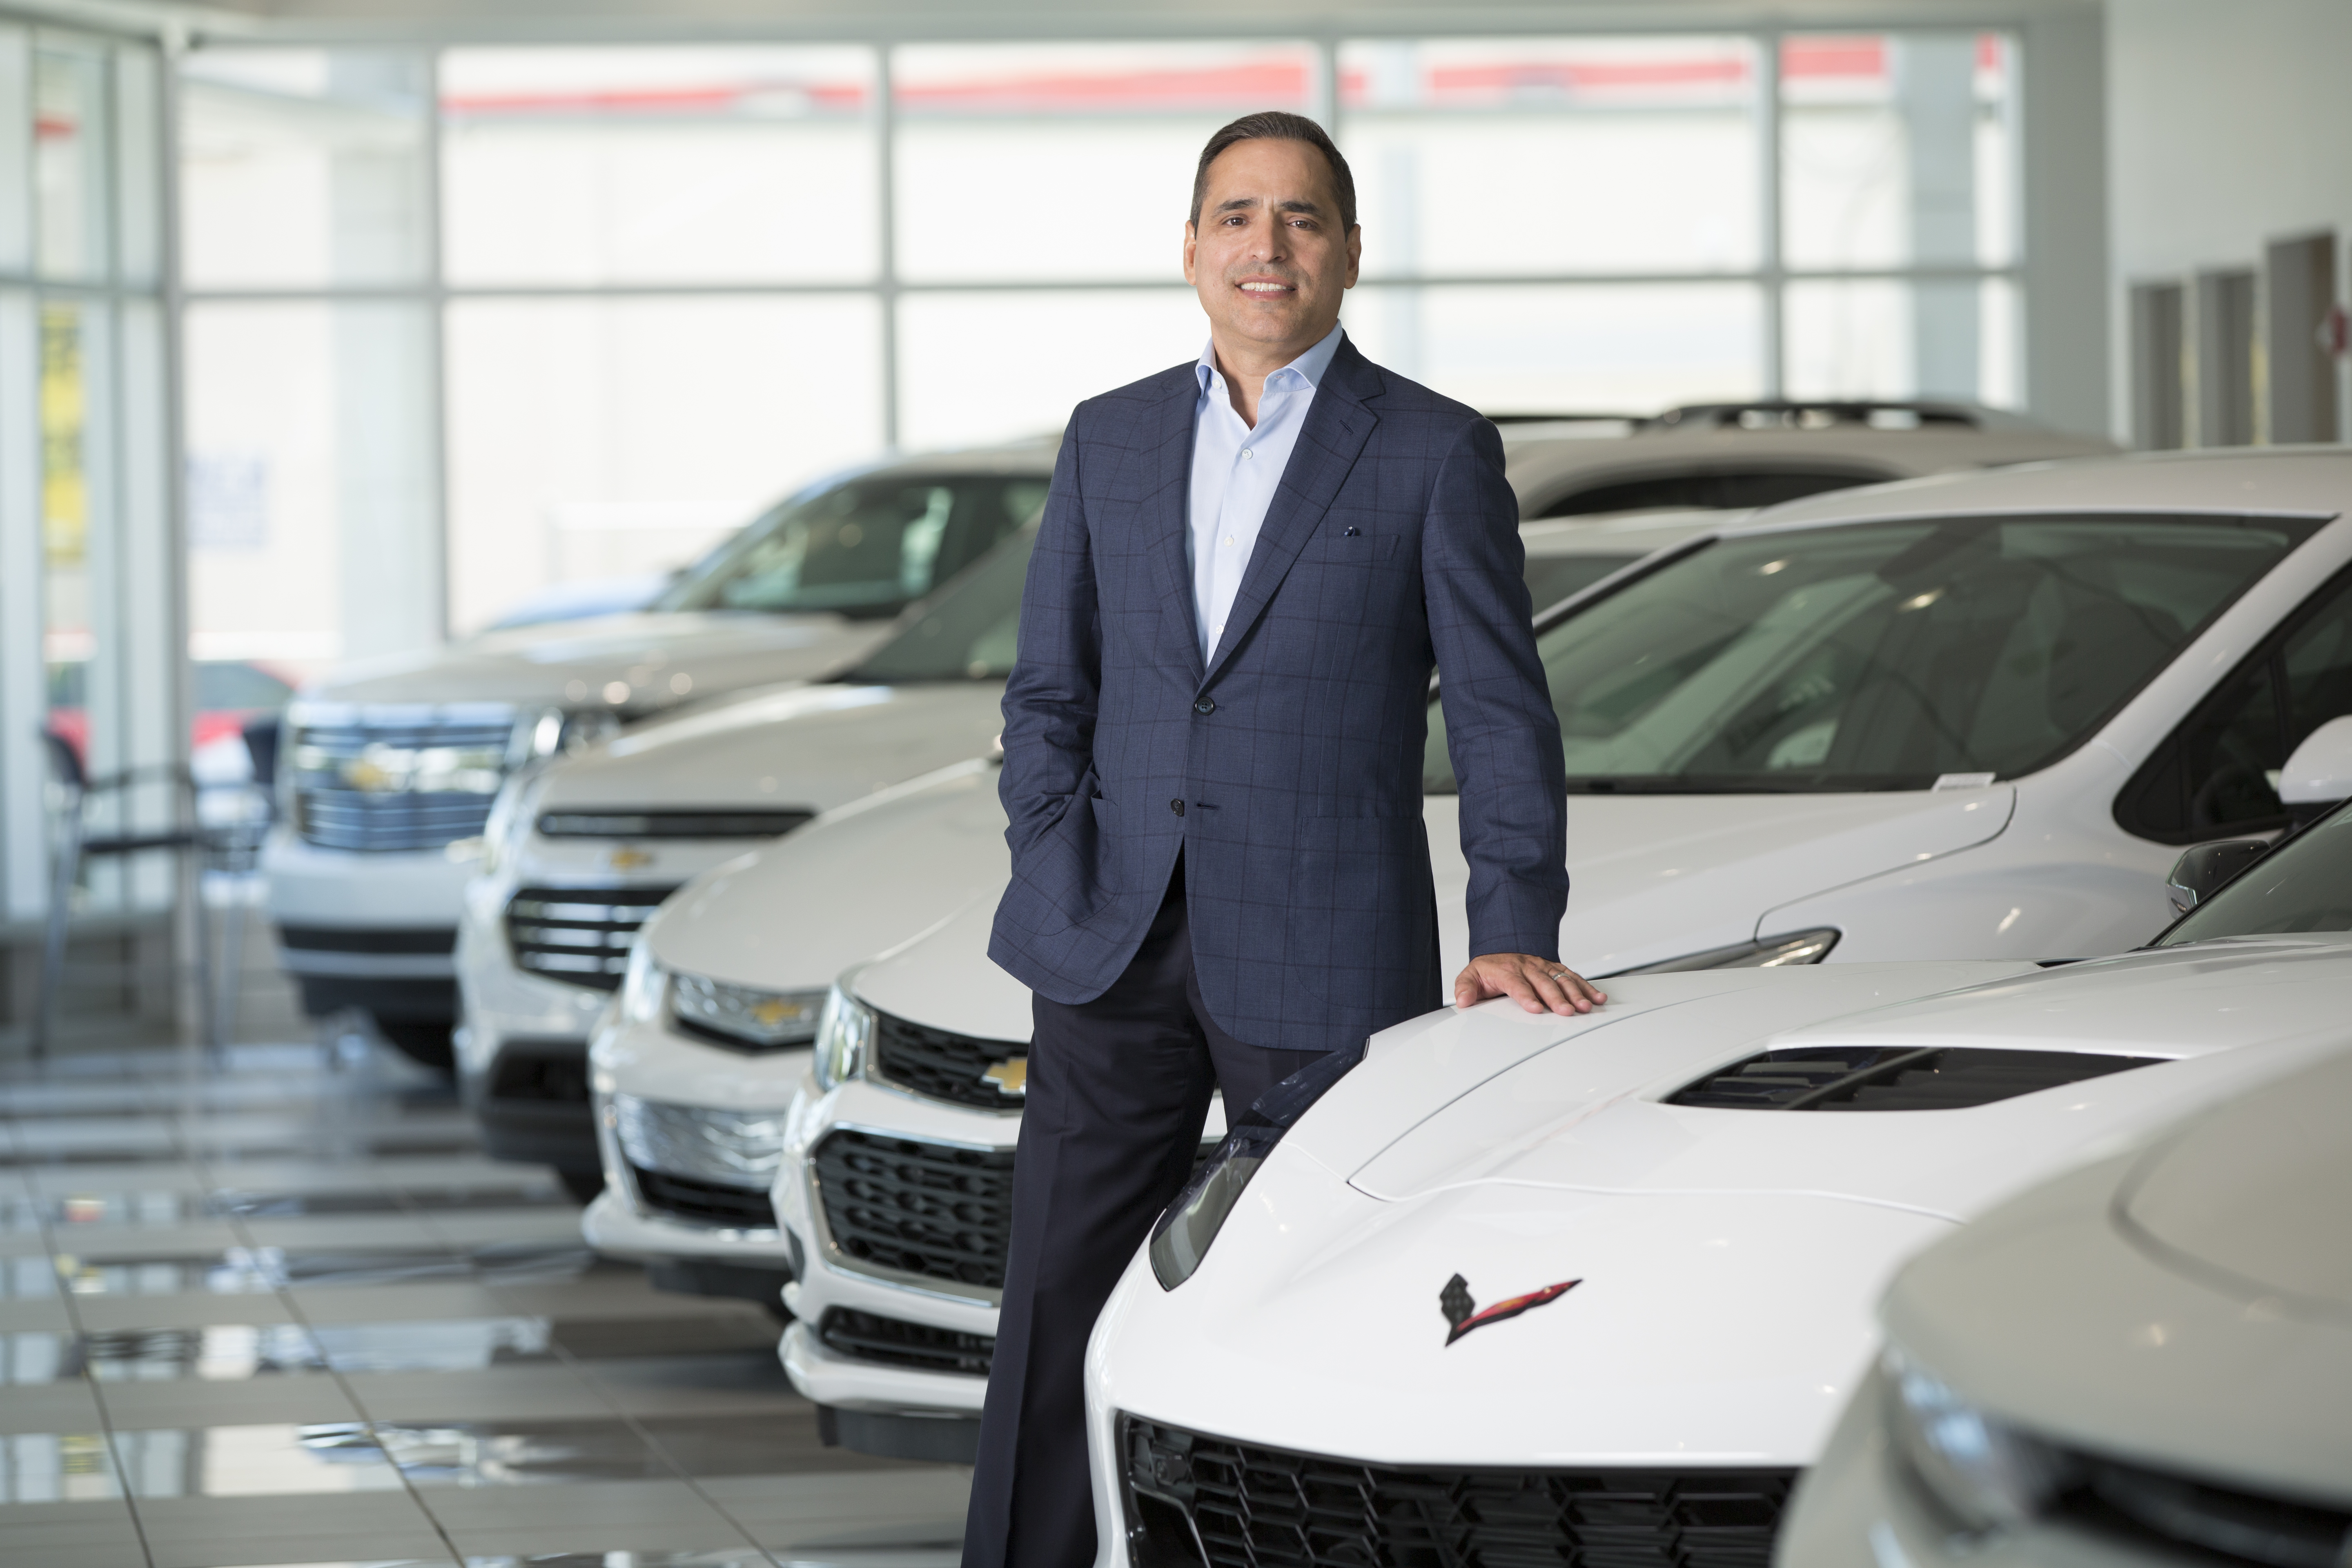 Bomnin’s Miami Chevrolet stores rank #1, #2 in U.S. among all Chevy dealerships YTD